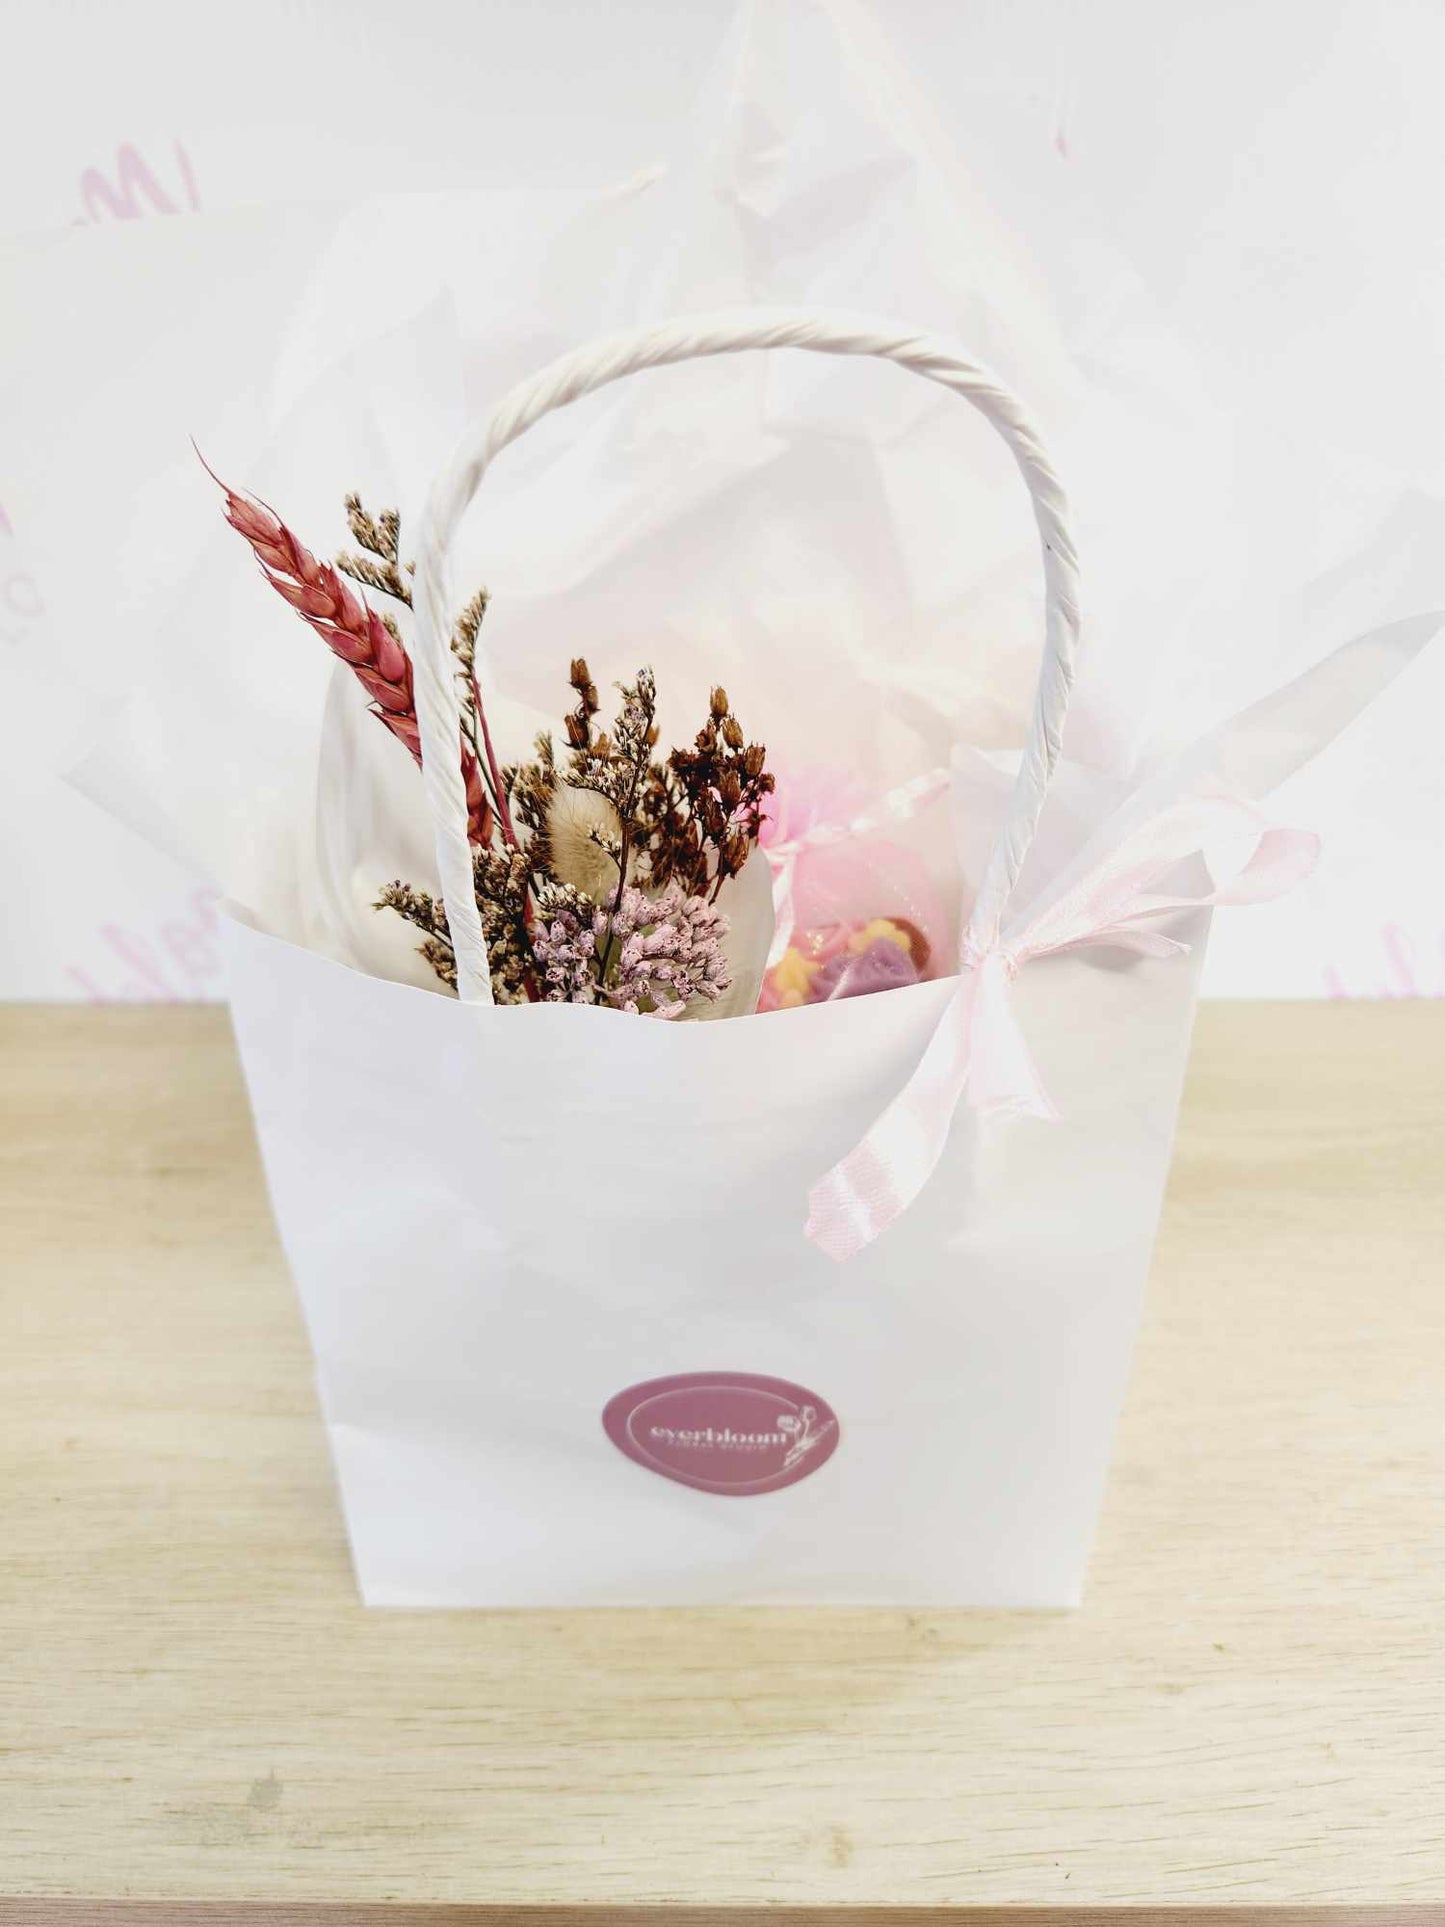 Dried flowers and gifts - Everbloom Floral Studio your local Mount Maunganui and Papamoa florist